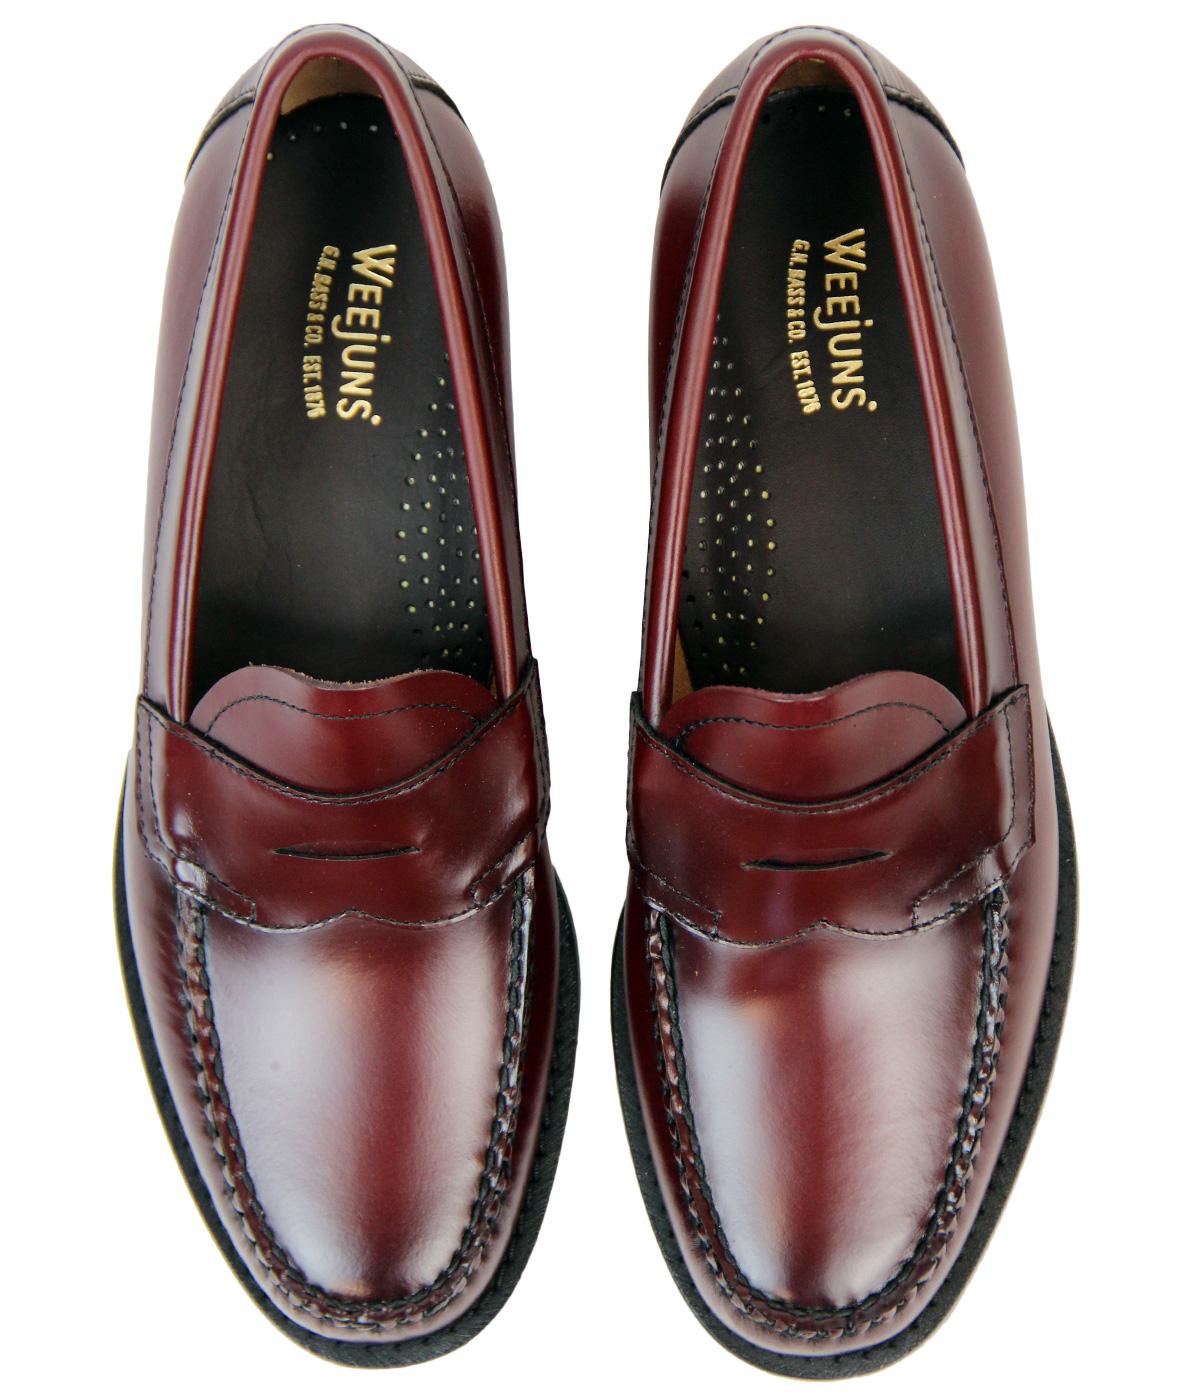 Bass Weejuns Heritage Logan Retro 60s Mod Penny Loafers in Wine